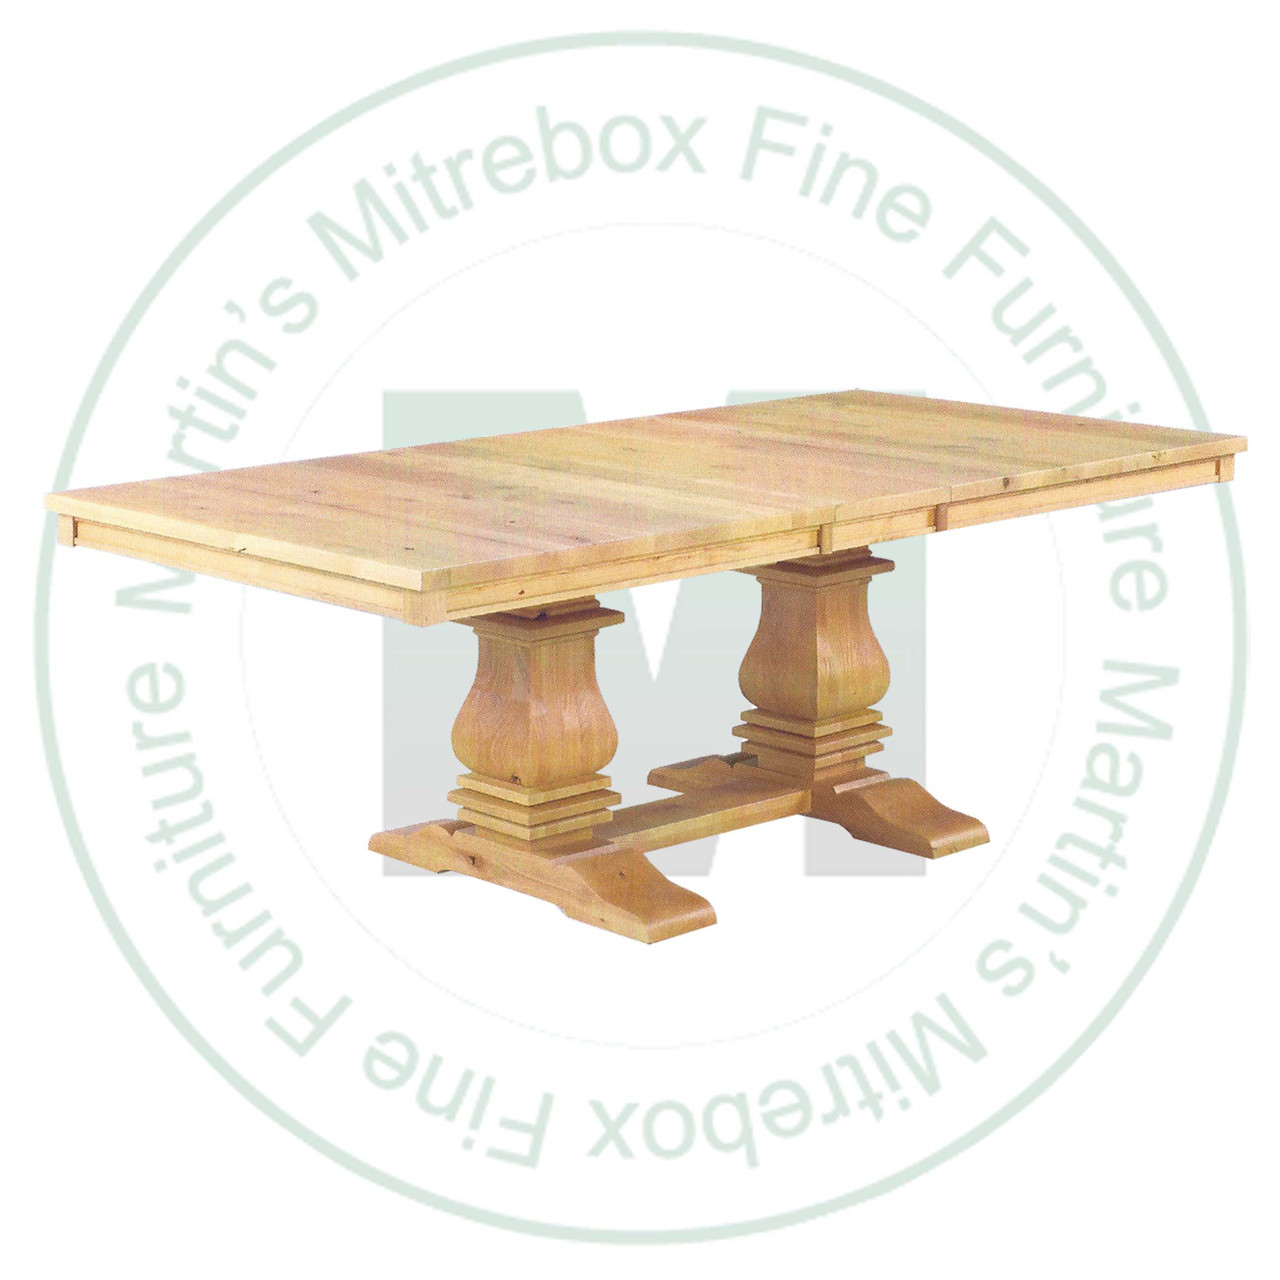 Wormy Maple Mediterranean Double Pedestal Table 48''D x 96''W x 30''H With 2 - 12'' Leaves. Table Has 1.25'' Thick Top